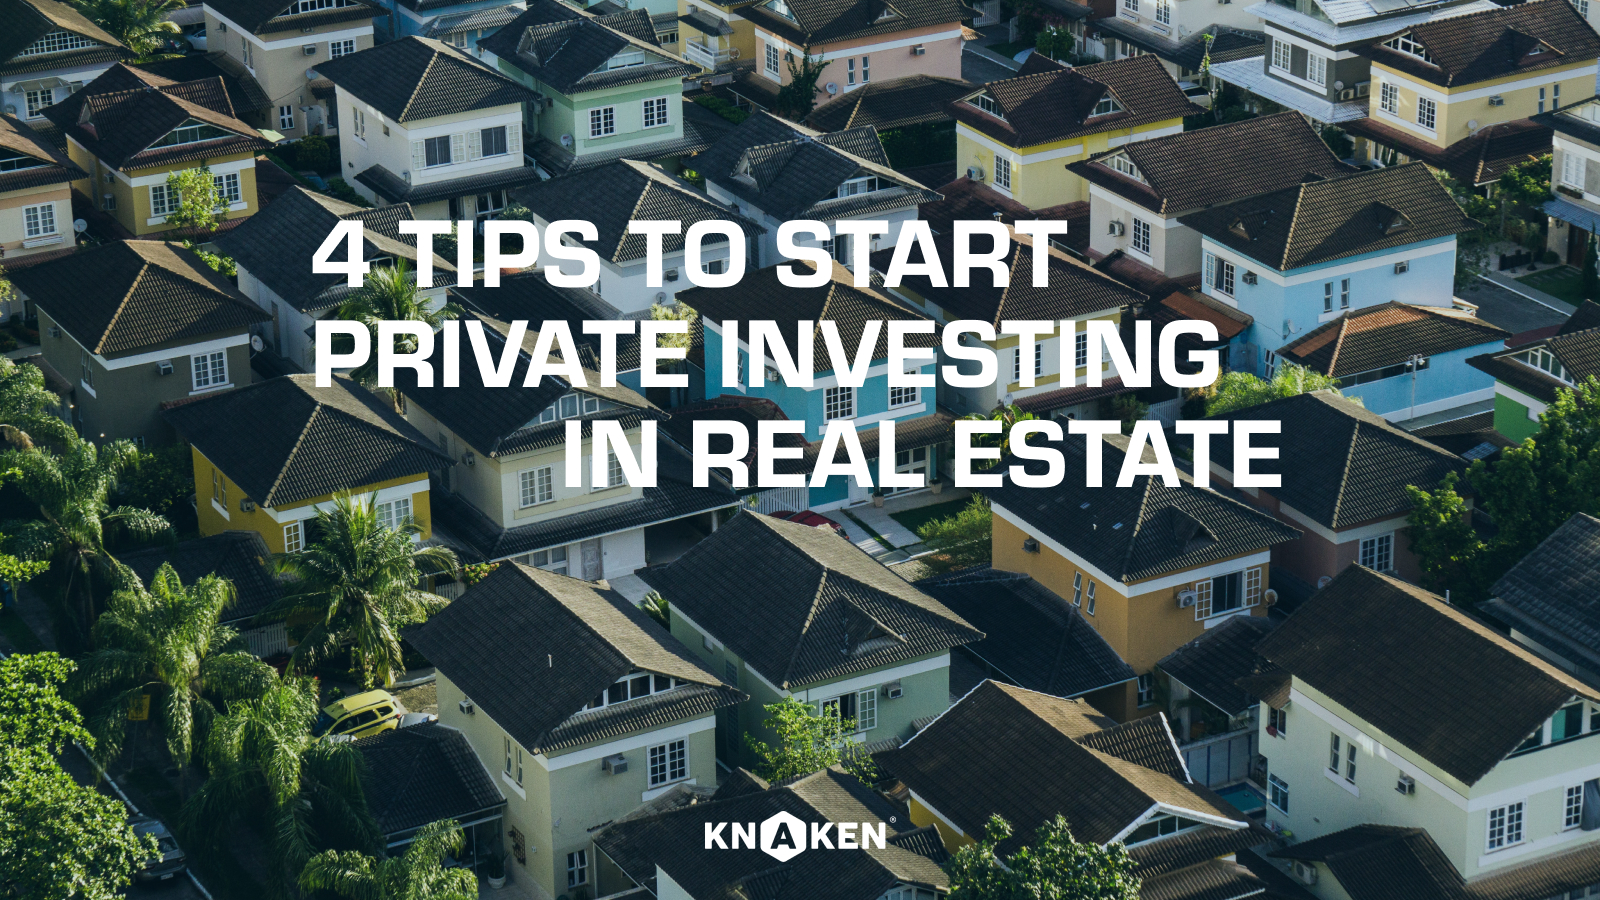 4 tips to start private real estate investing